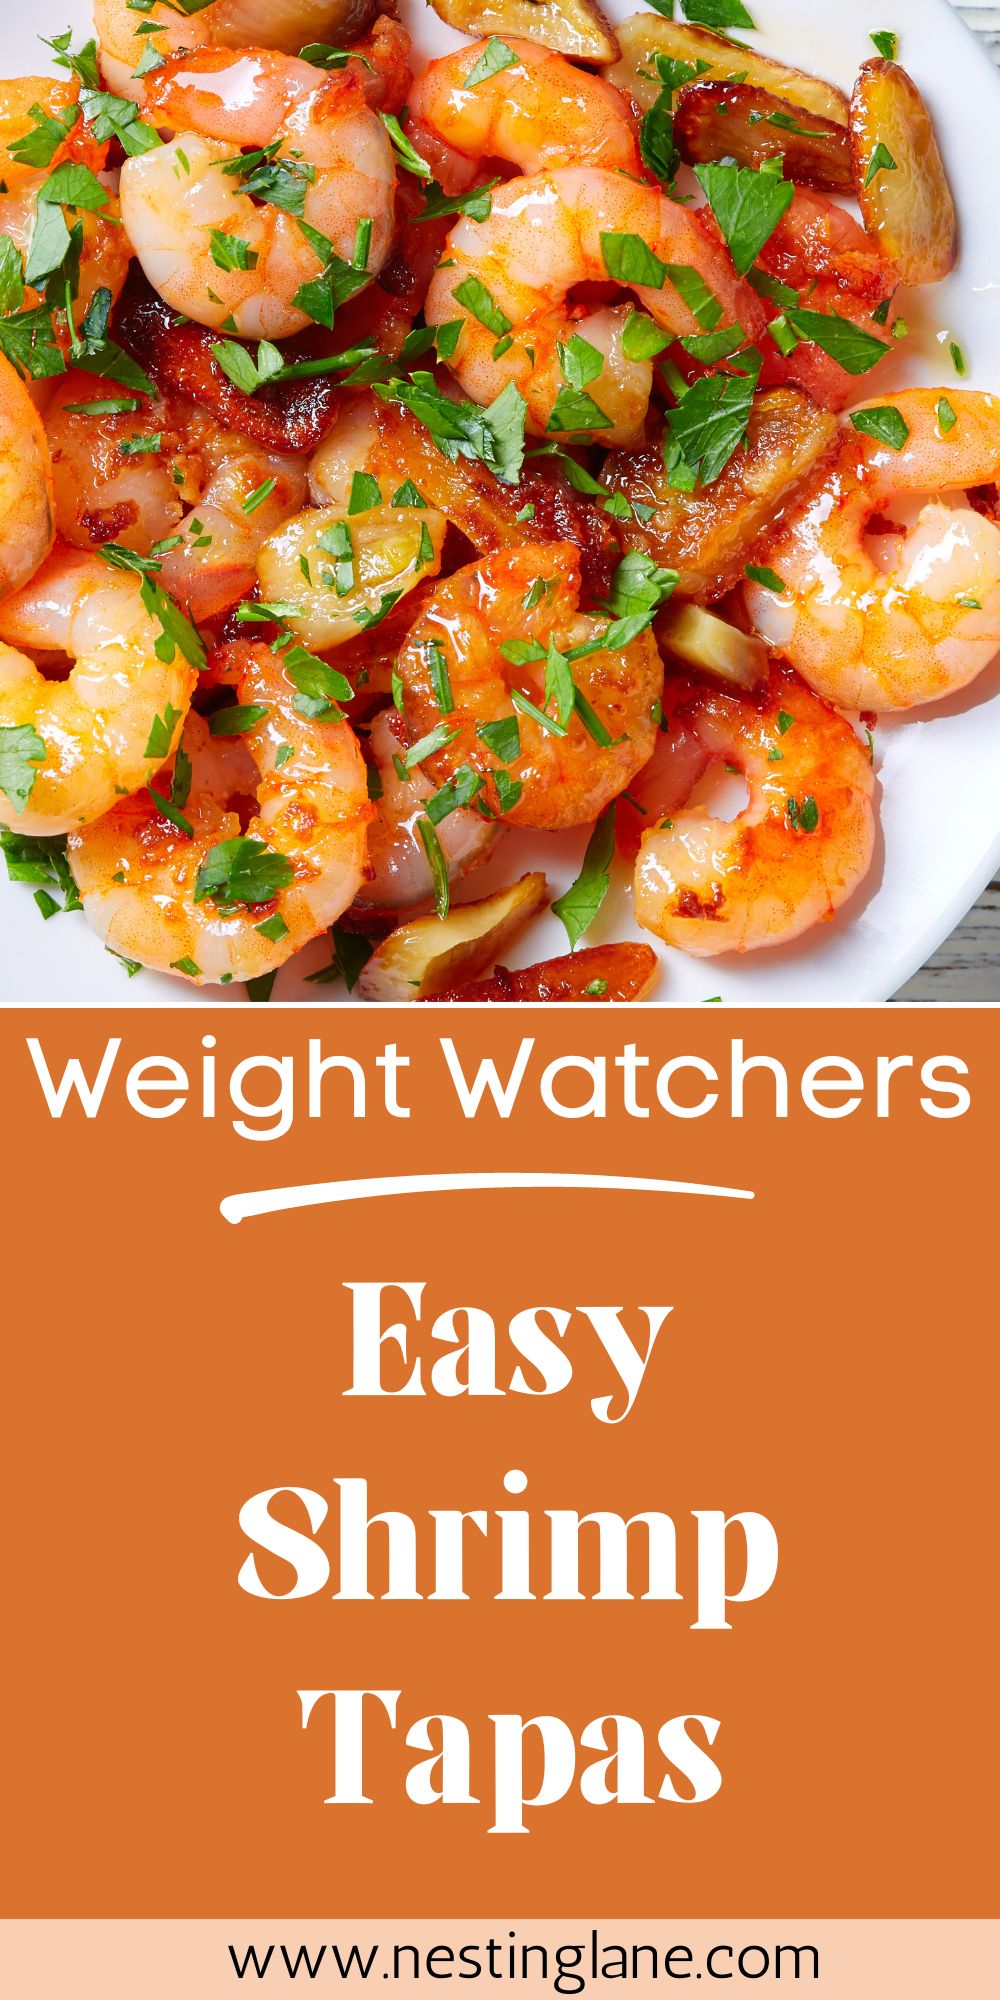 Graphic for Pinterest of Easy Weight Watchers Shrimp Tapas Recipe.